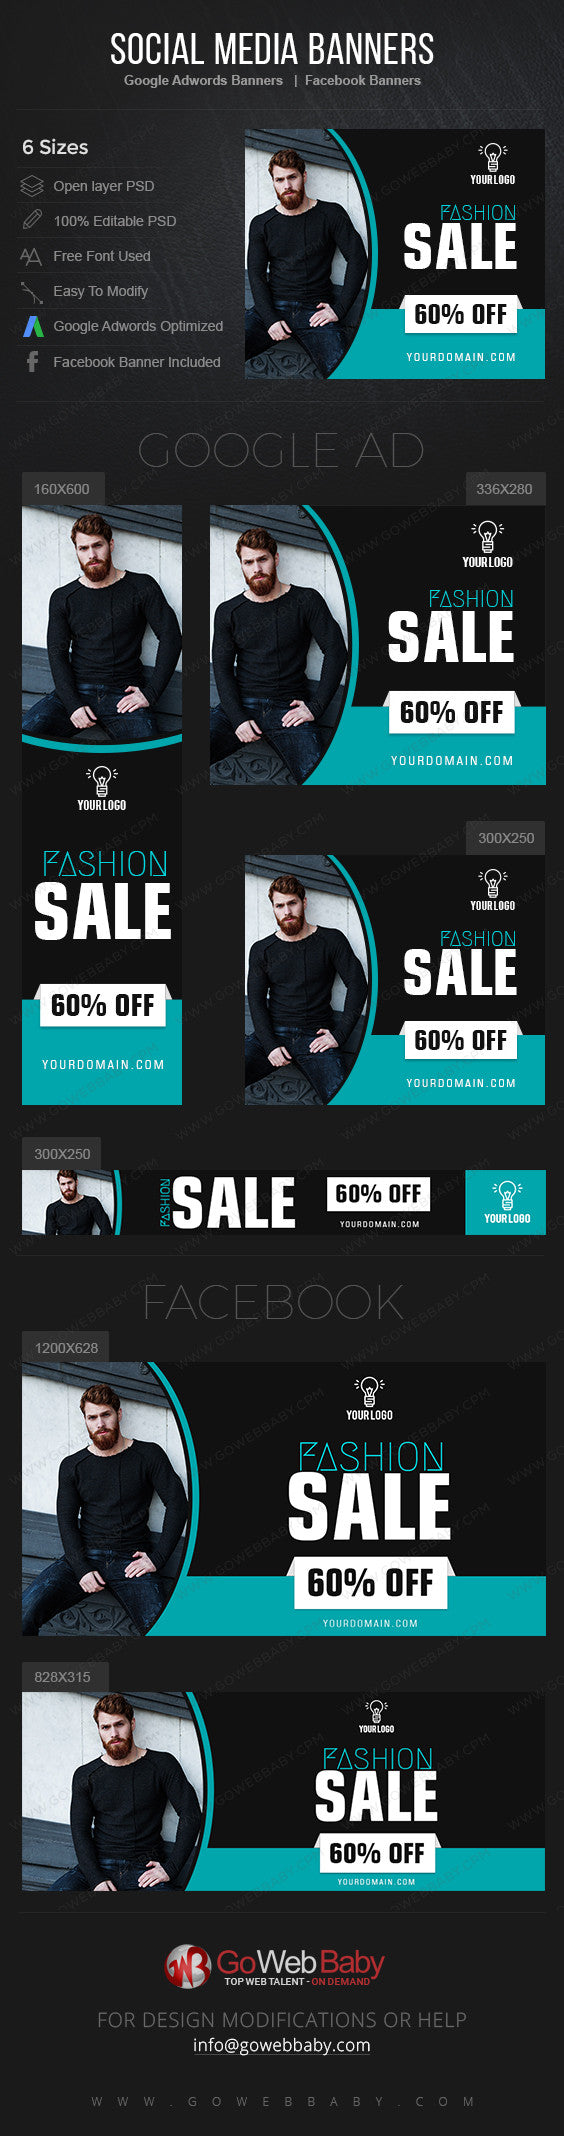 Google Adwords Display Banner With Facebook Banners - Men's Collection For Website Marketing - GoWebBaby.Com